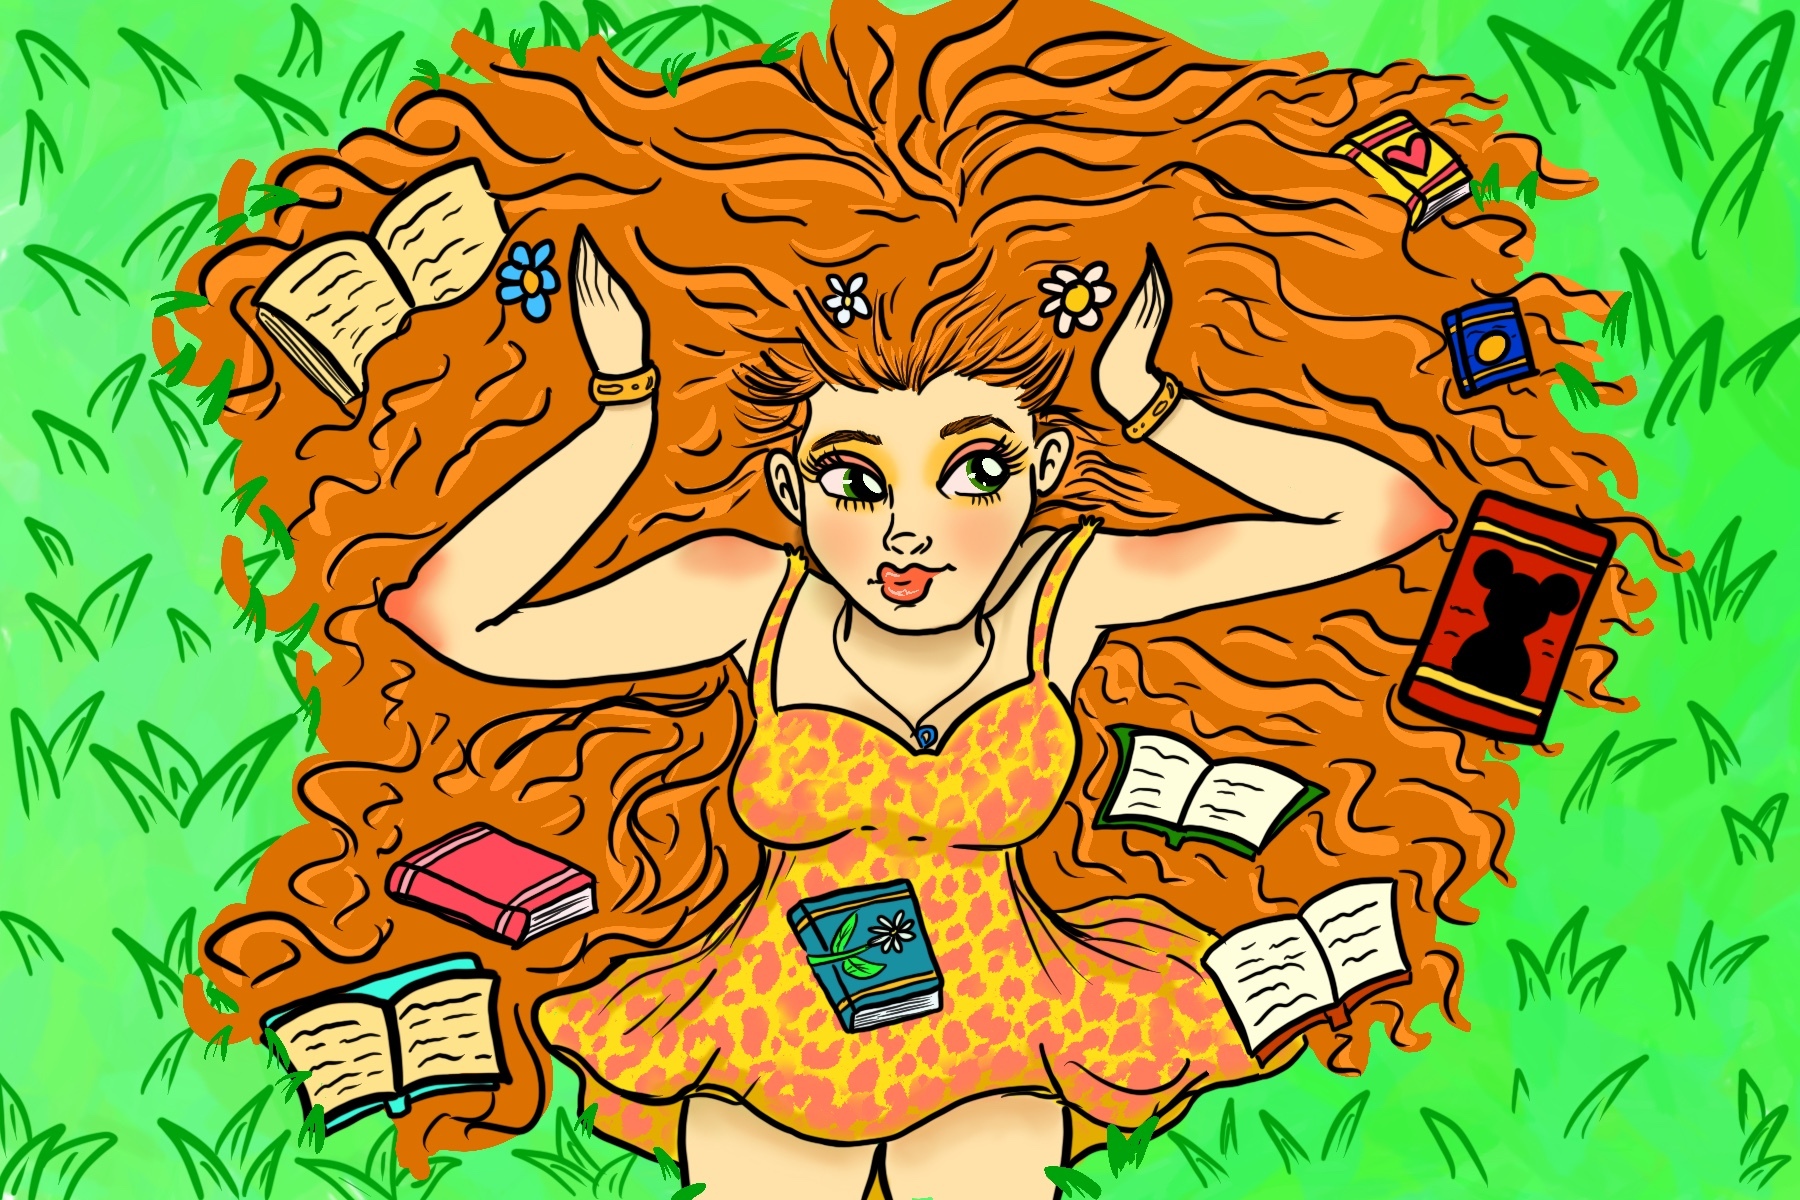 A woman in a red and yellow sun dress, and long flowing hair, lays on a field of green with books scattered around her